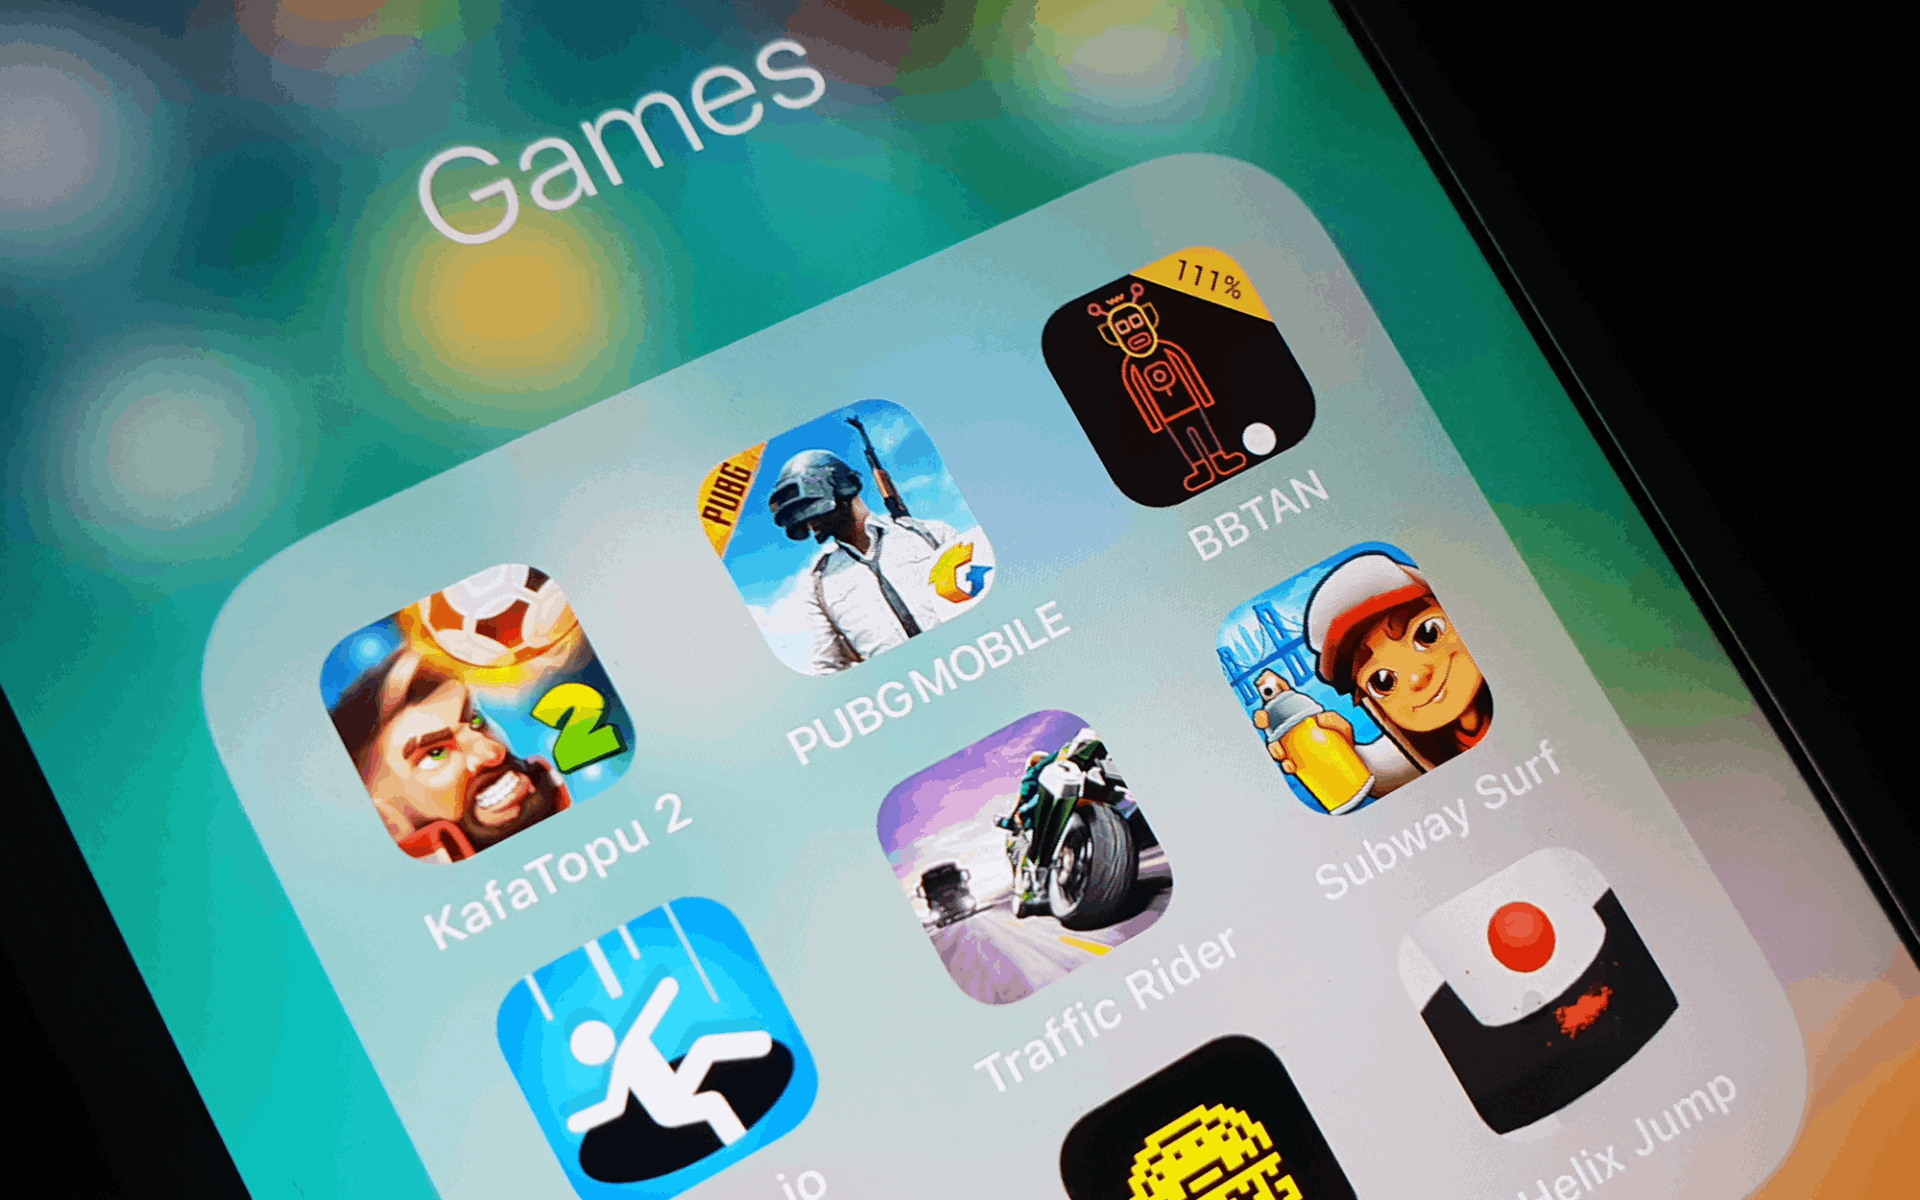 See The Top iOS Games Of All Time